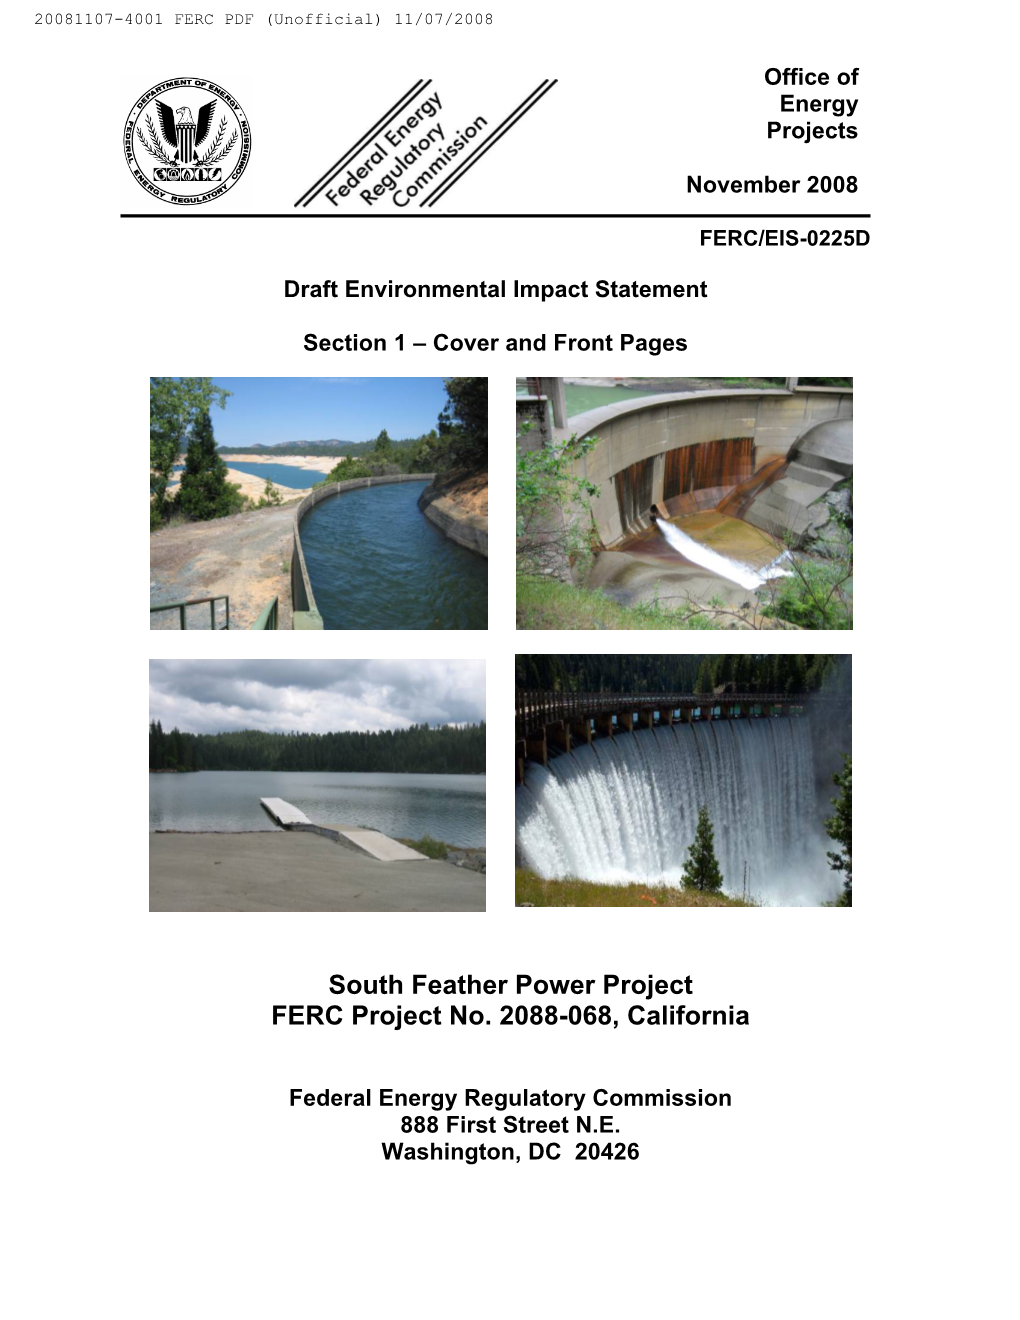 South Feather Power Project FERC Project No. 2088-068, California